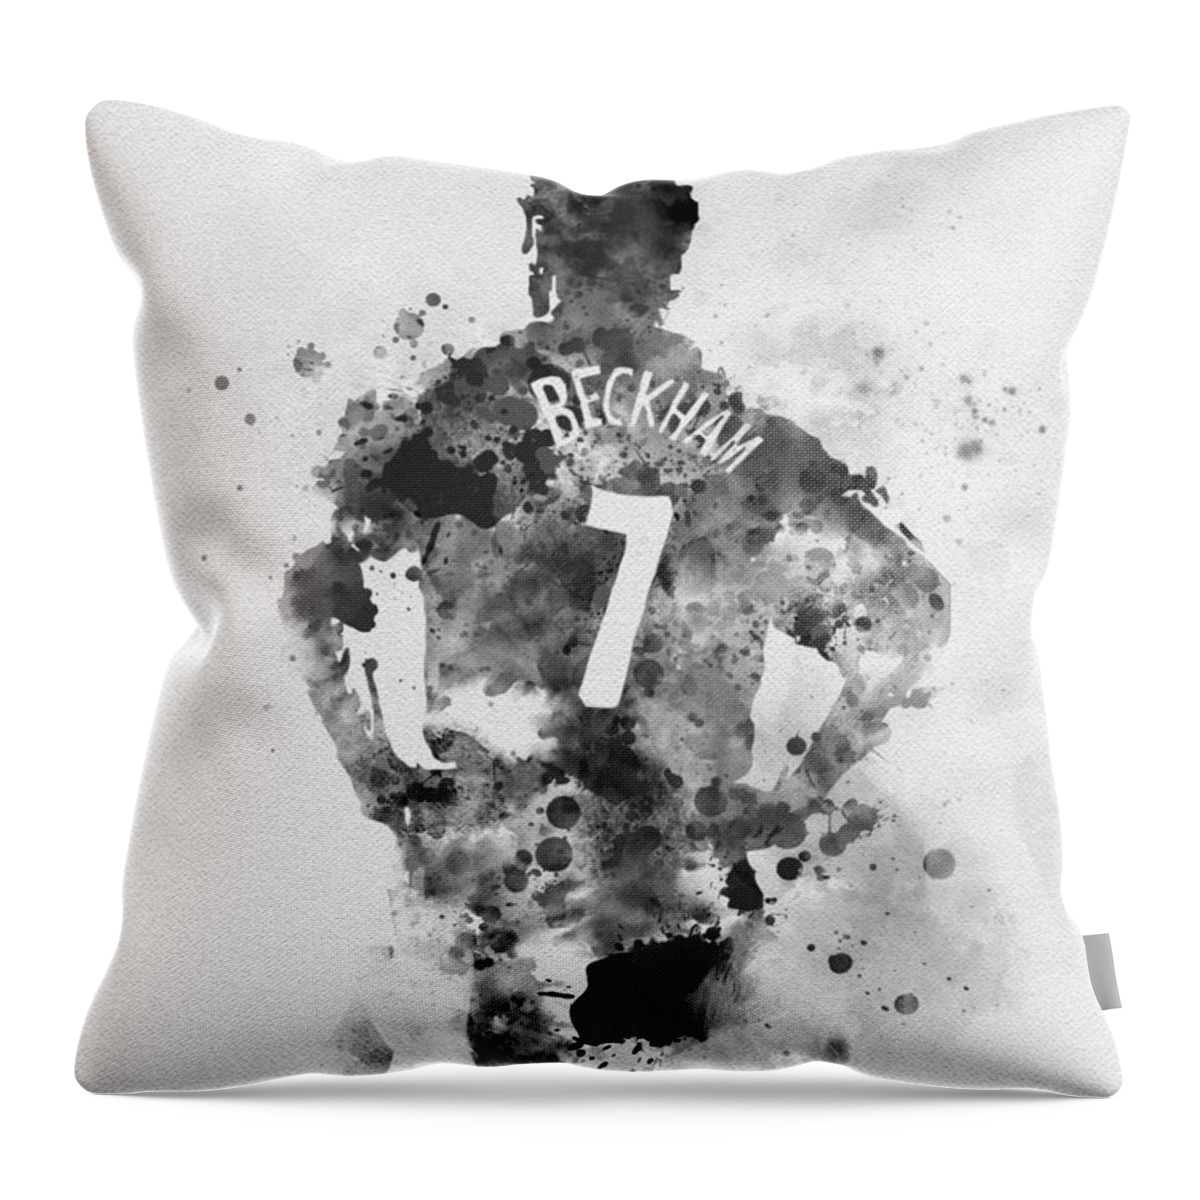 David Beckham Black and White Throw Pillow by New Inspiration - Pixels